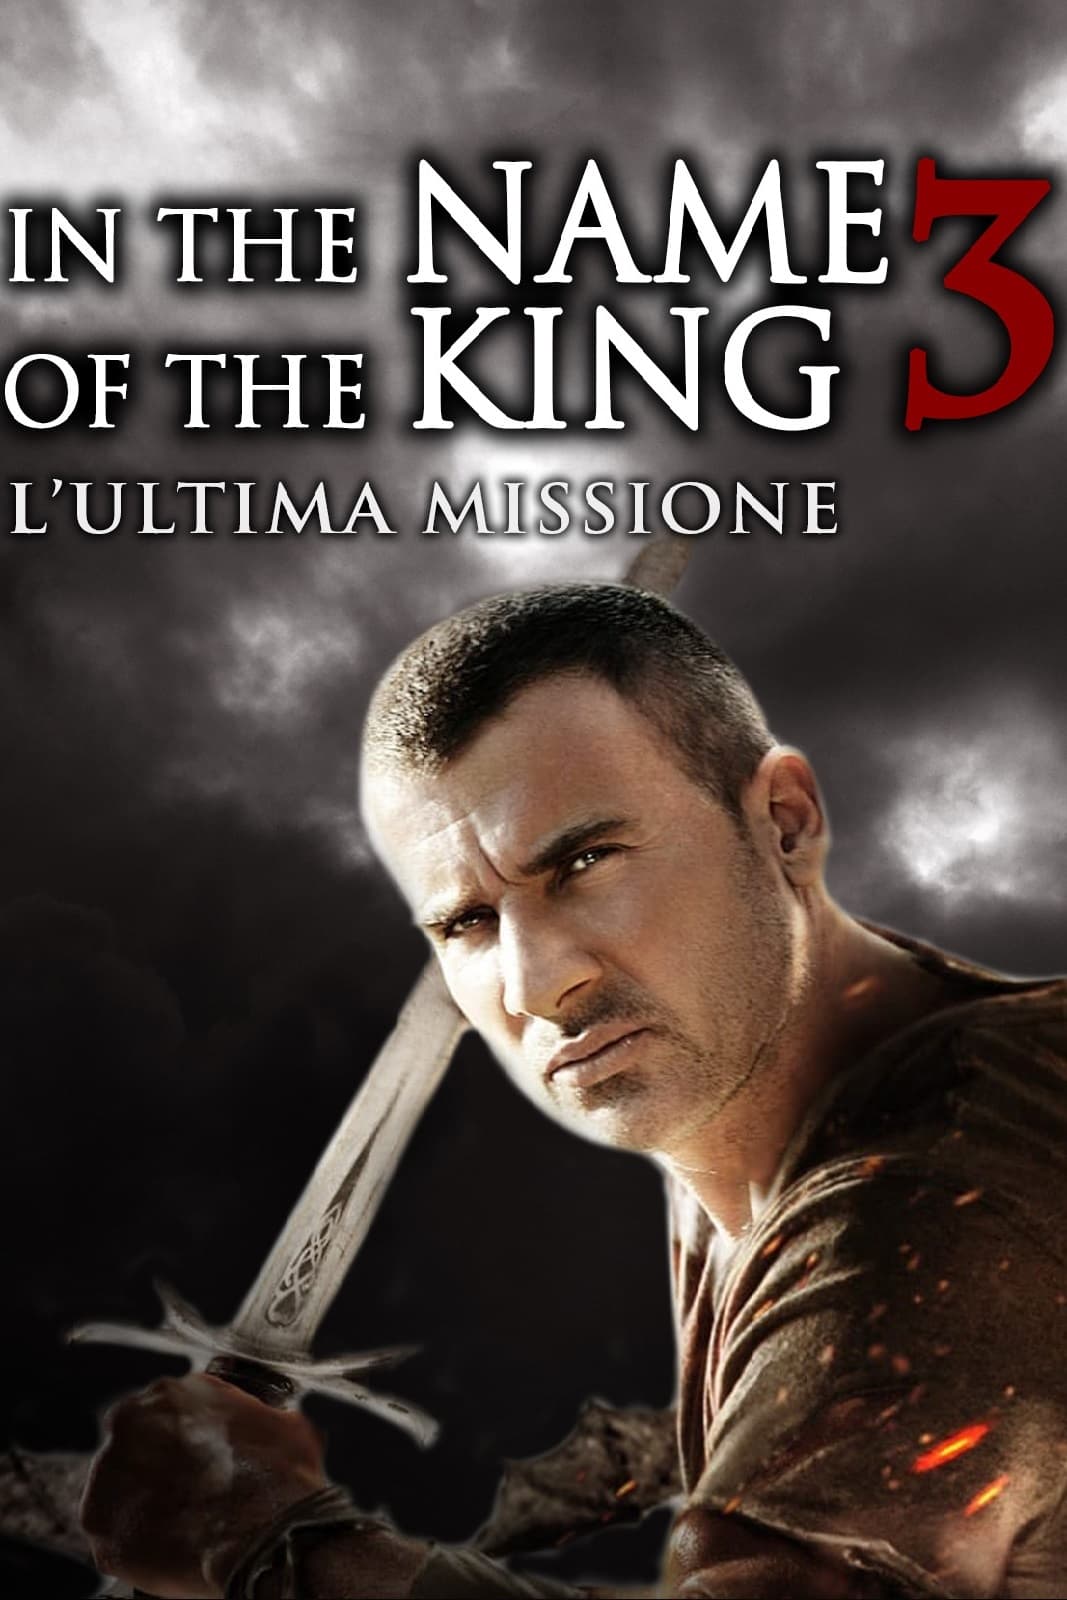 In the Name of the King 3 - L'ultima missione film